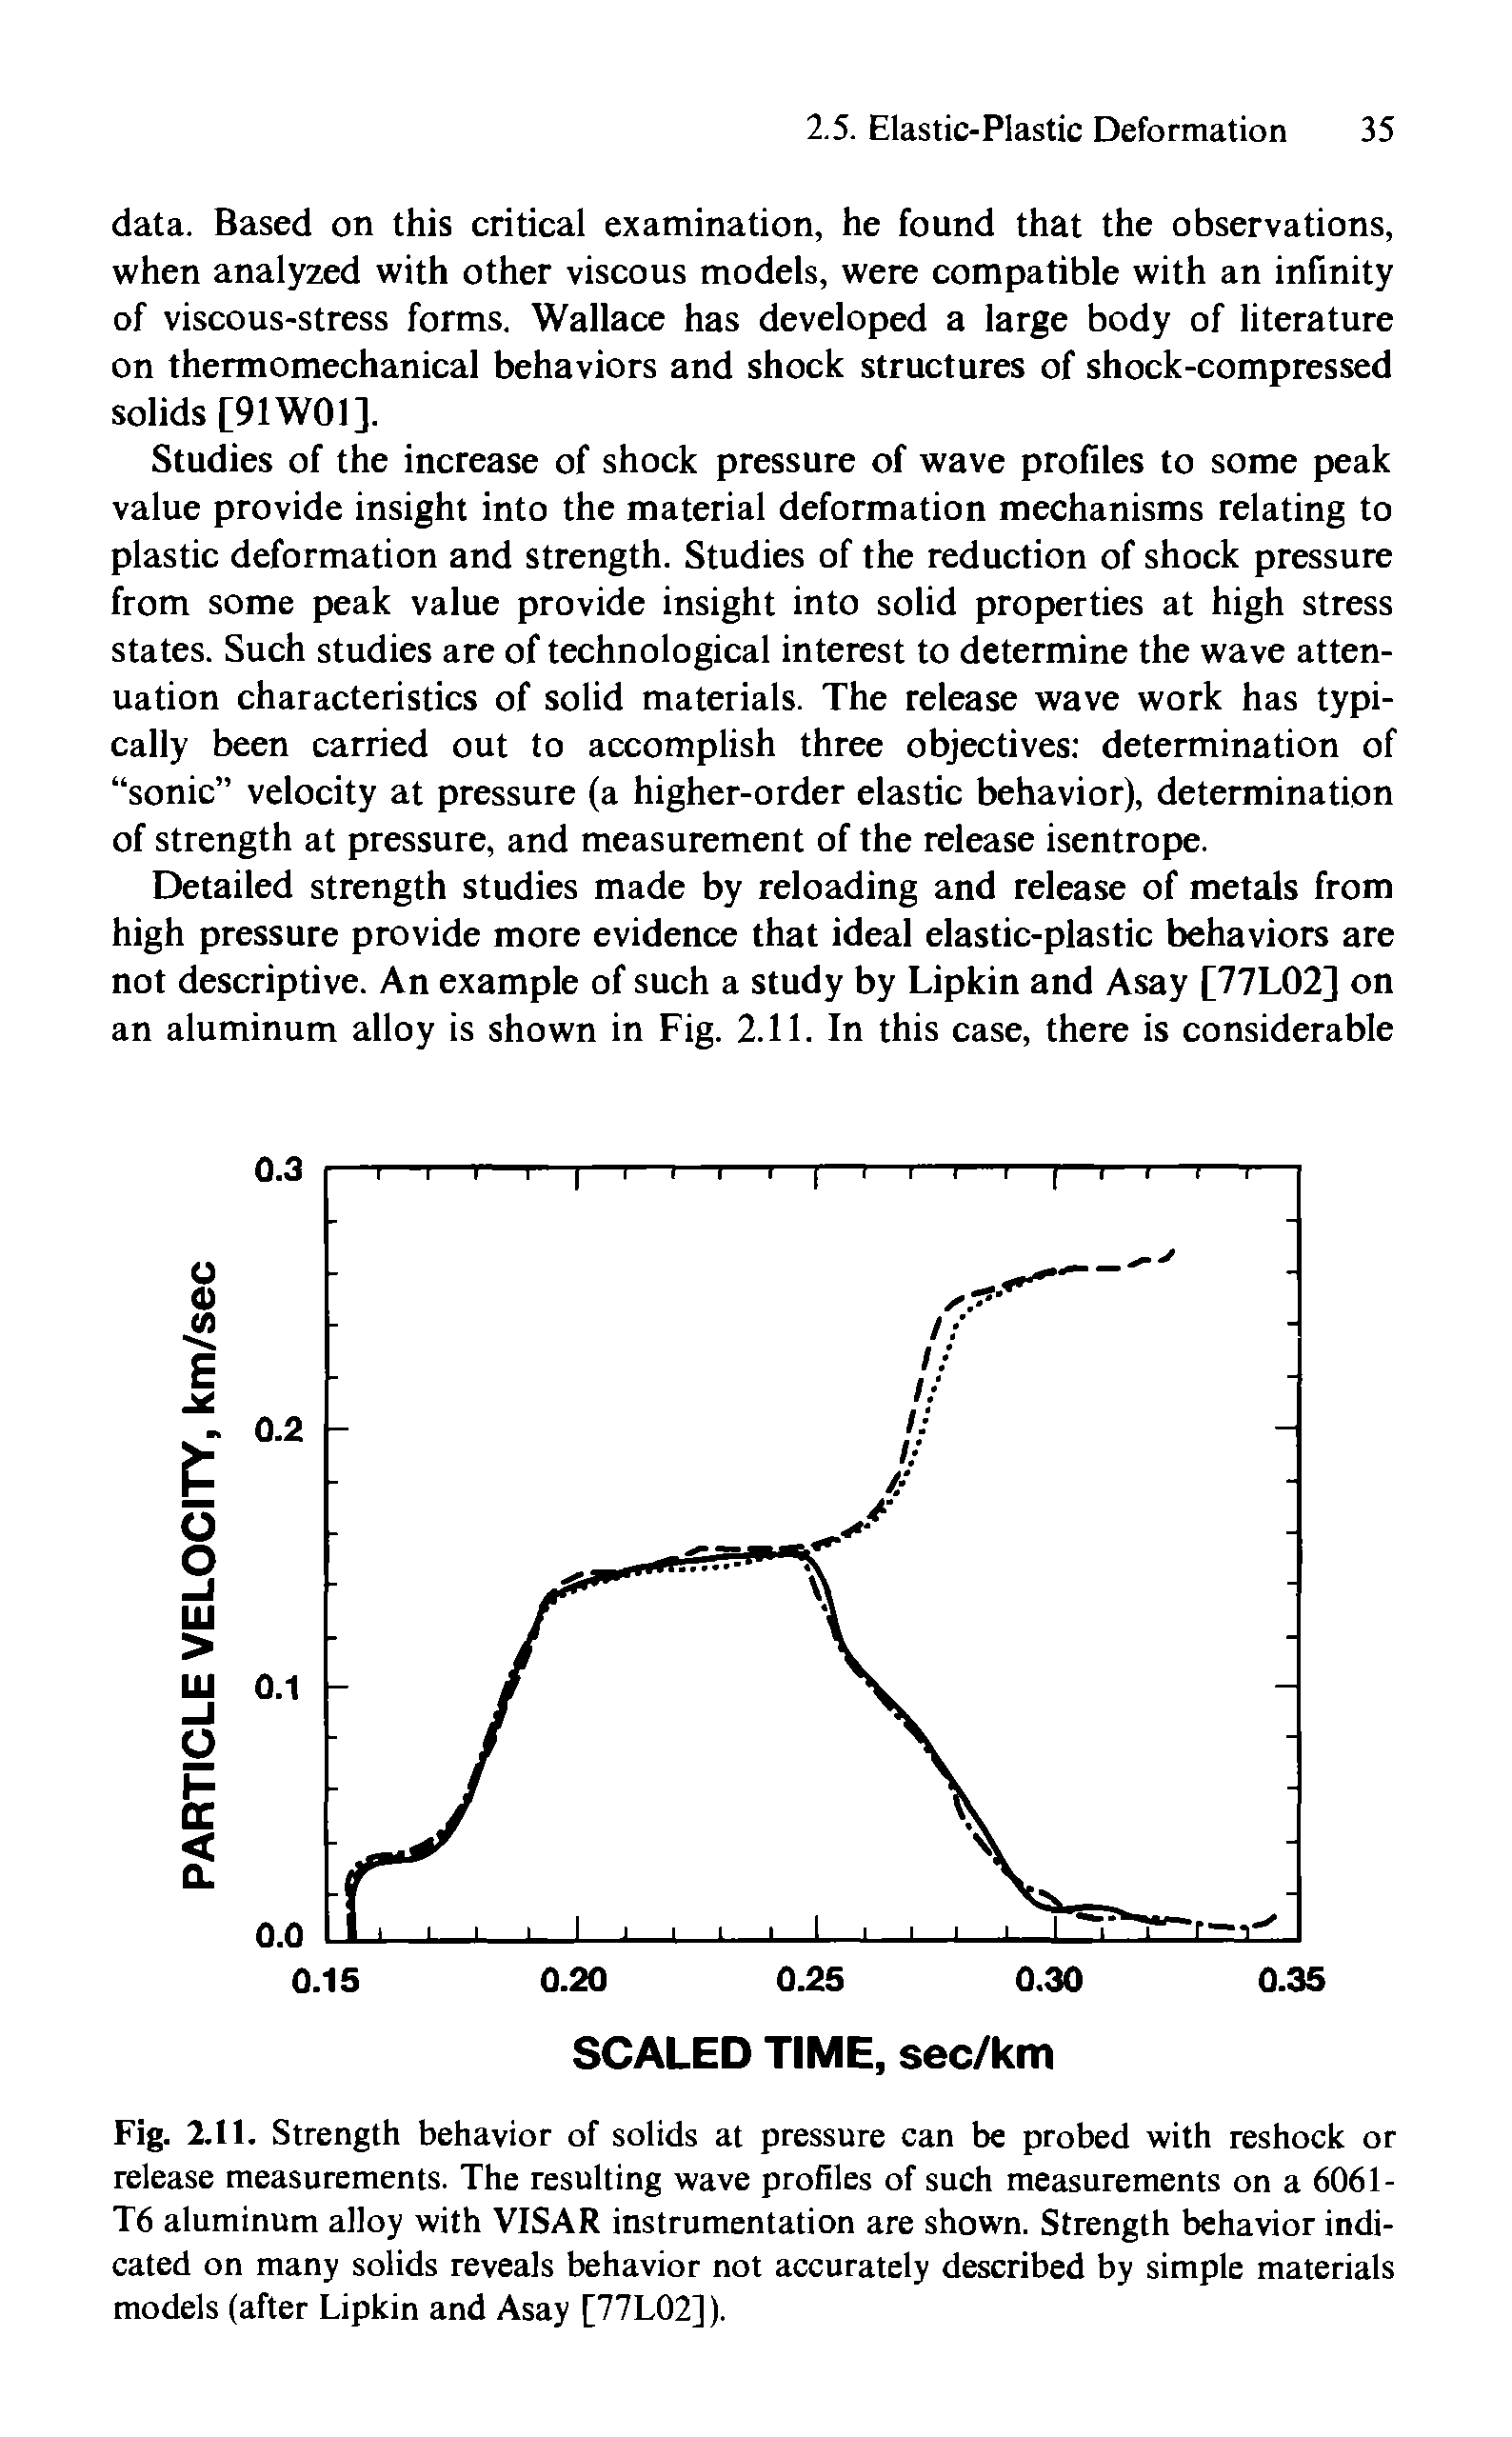 Fig. 2.11. Strength behavior of solids at pressure can be probed with reshock or release measurements. The resulting wave profiles of such measurements on a 6061-T6 aluminum alloy with VISAR instrumentation are shown. Strength behavior indicated on many solids reveals behavior not accurately described by simple materials models (after Lipkin and Asay [77L02]).